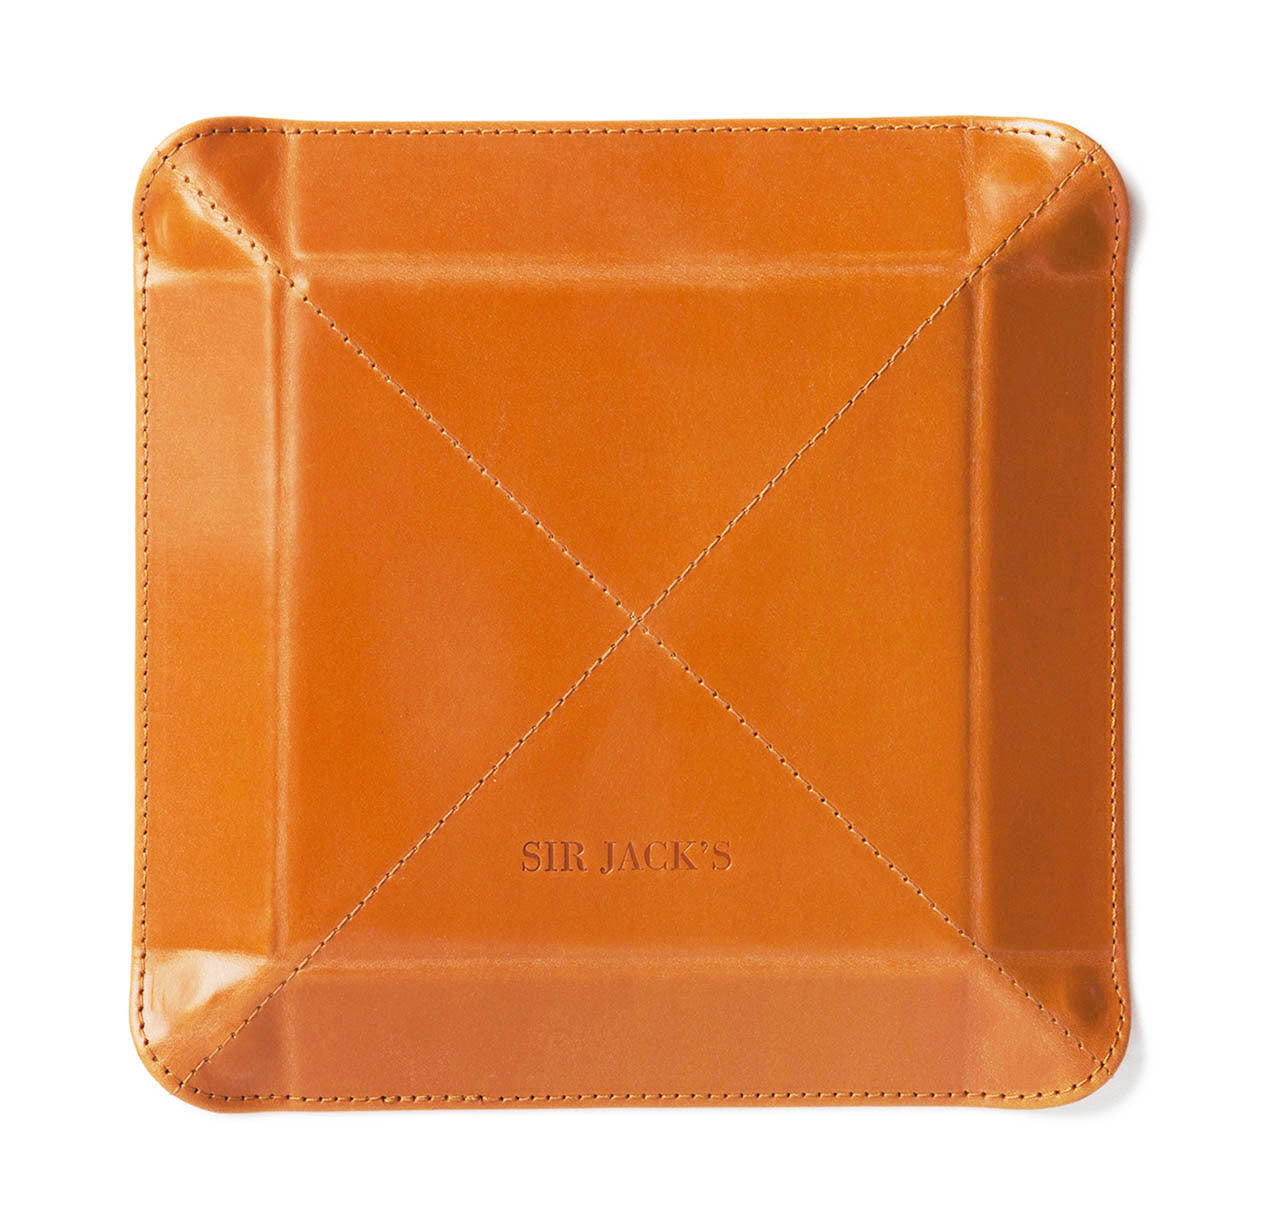 London Tan Leather Travel Tray